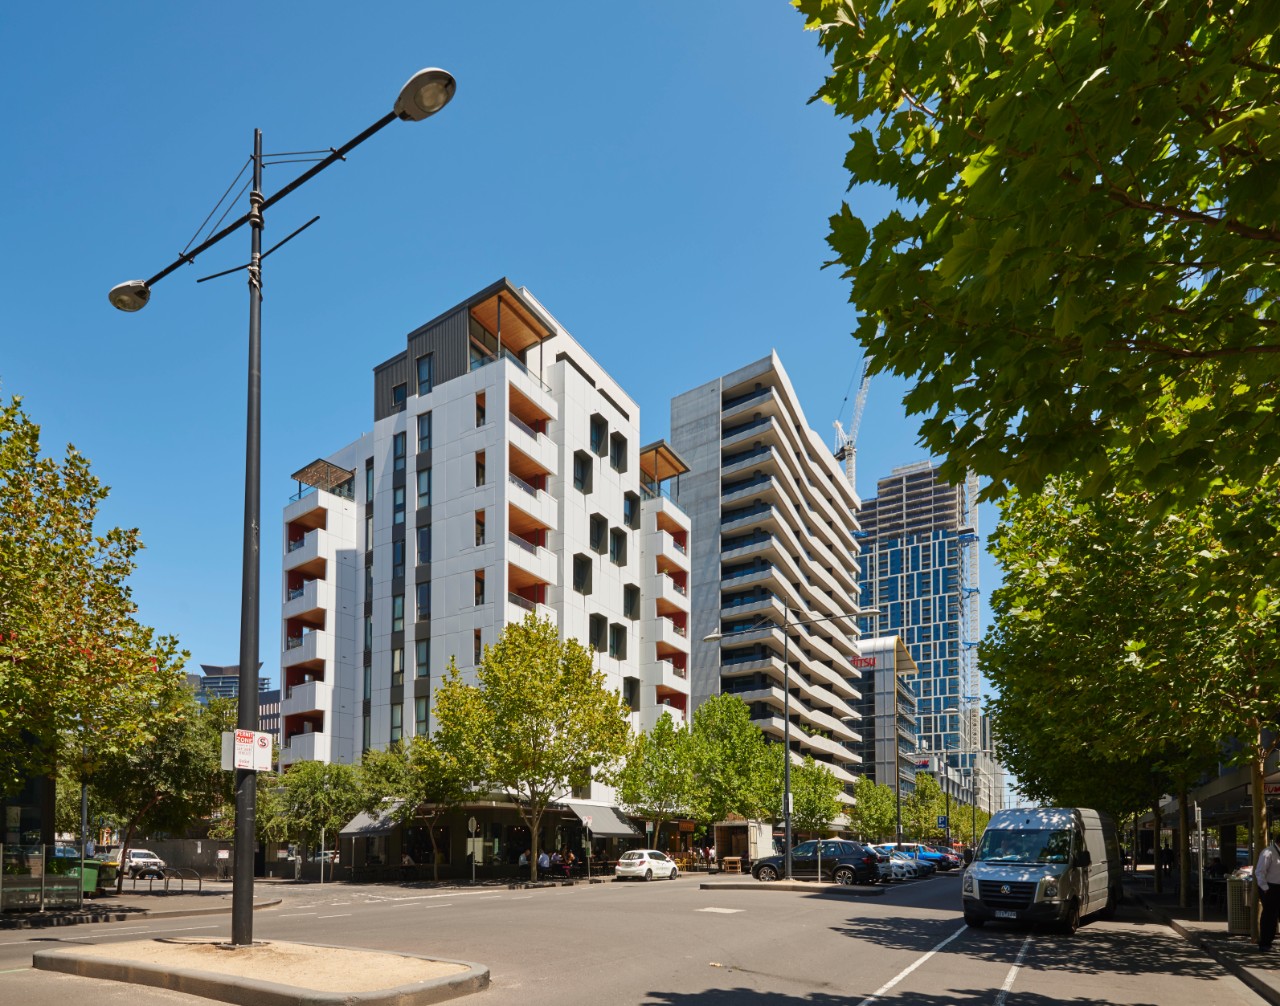 Forte in Victoria Harbour, Melbourne, designed and constructed by Lendlease. It is Australia’s first timber high-rise apartment building.